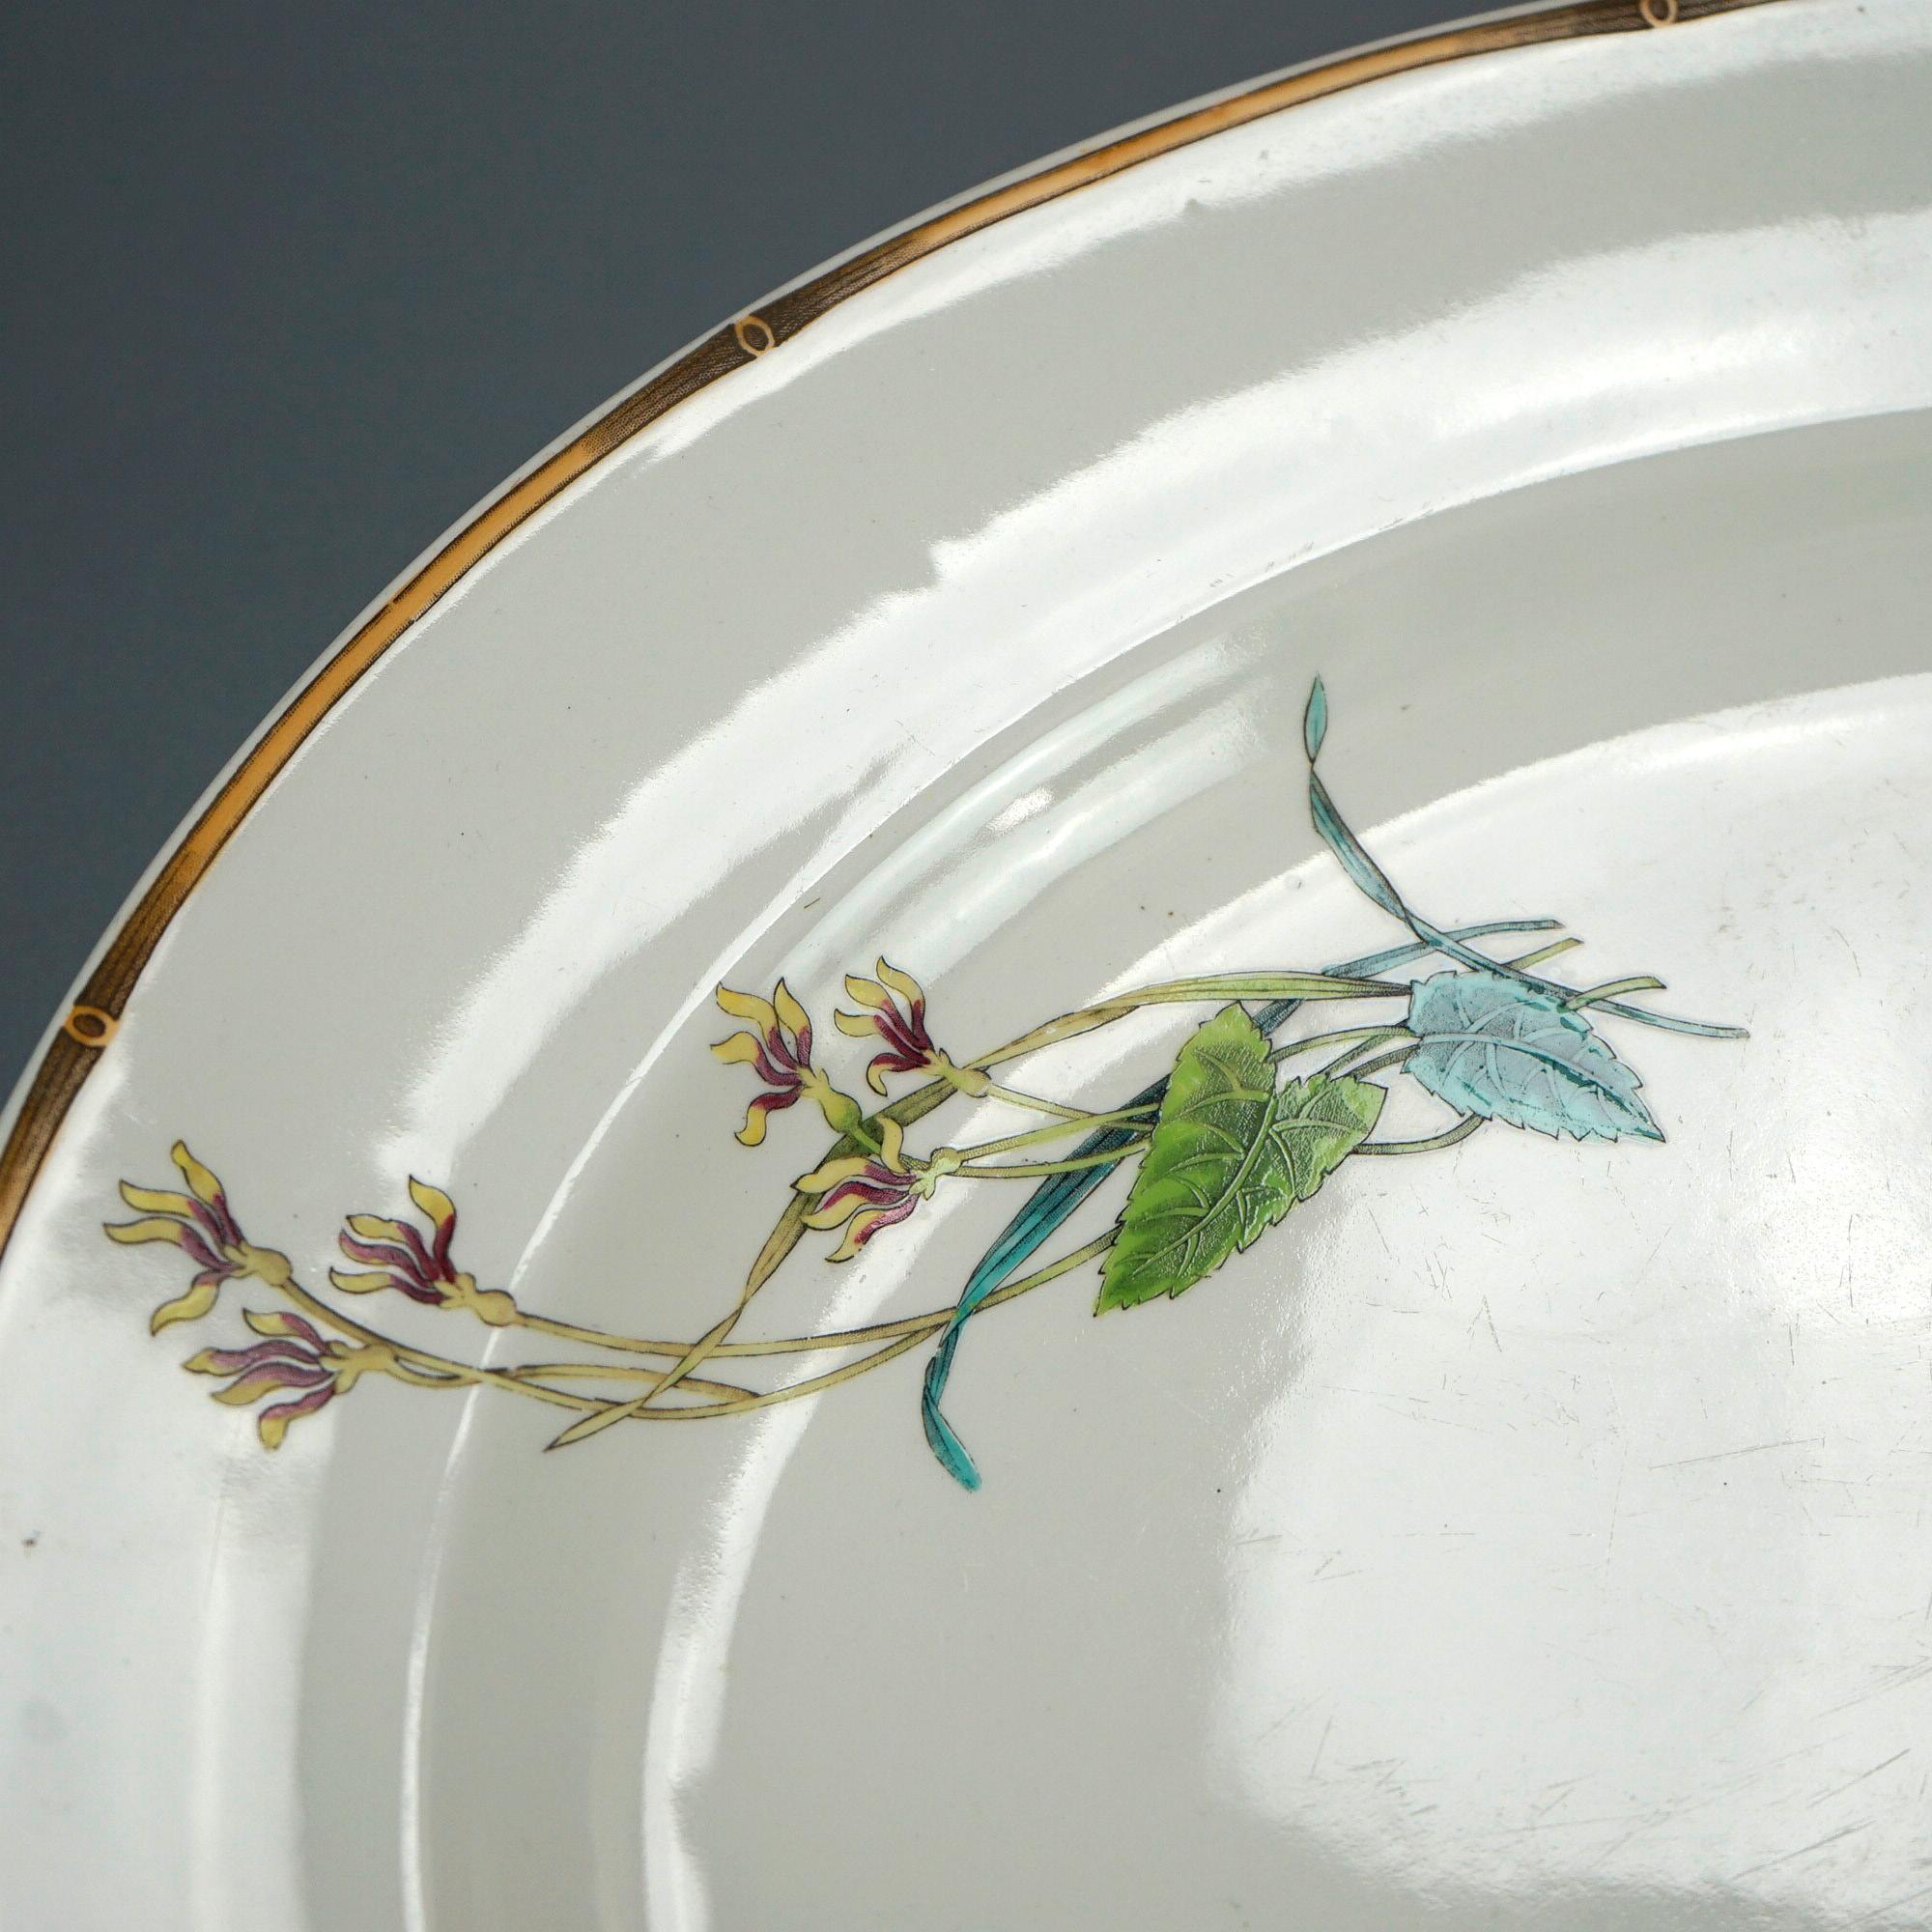 An antique Aesthetic Movement serving platter offers porcelain construction in oval form with bird and garden elements, gilt highlights throughout, 19th century

Measures- 2.5'' H x 21'' W x 17.5'' D.